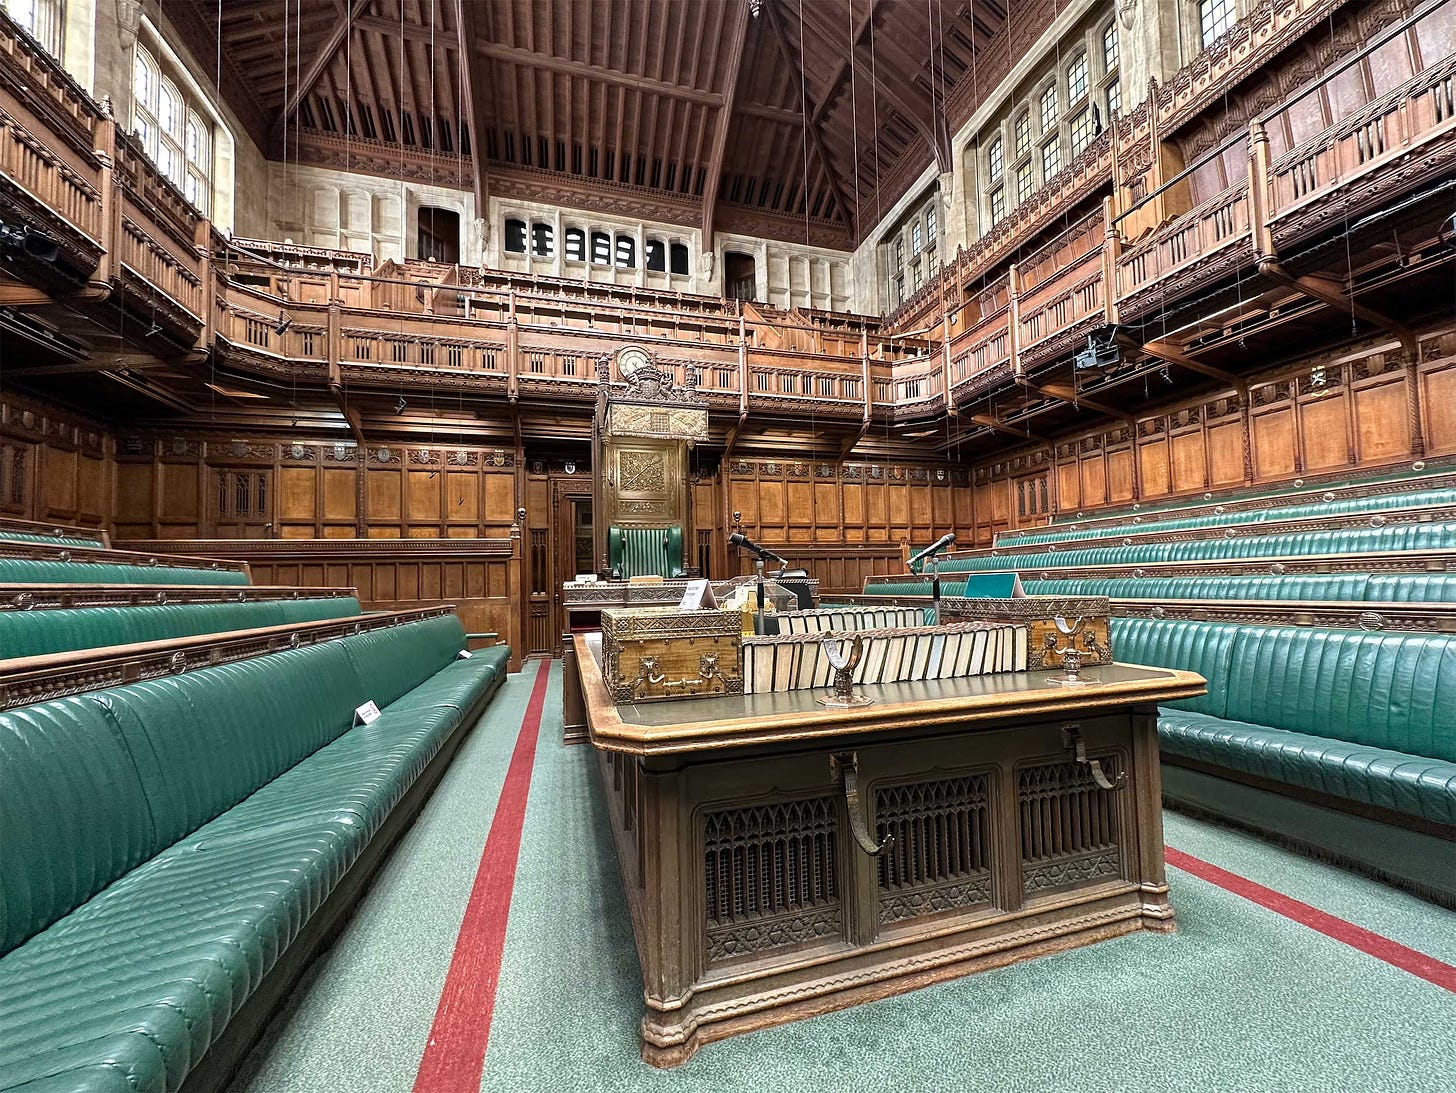 Historic interior of the parliamentary chamber in the House of Commons.